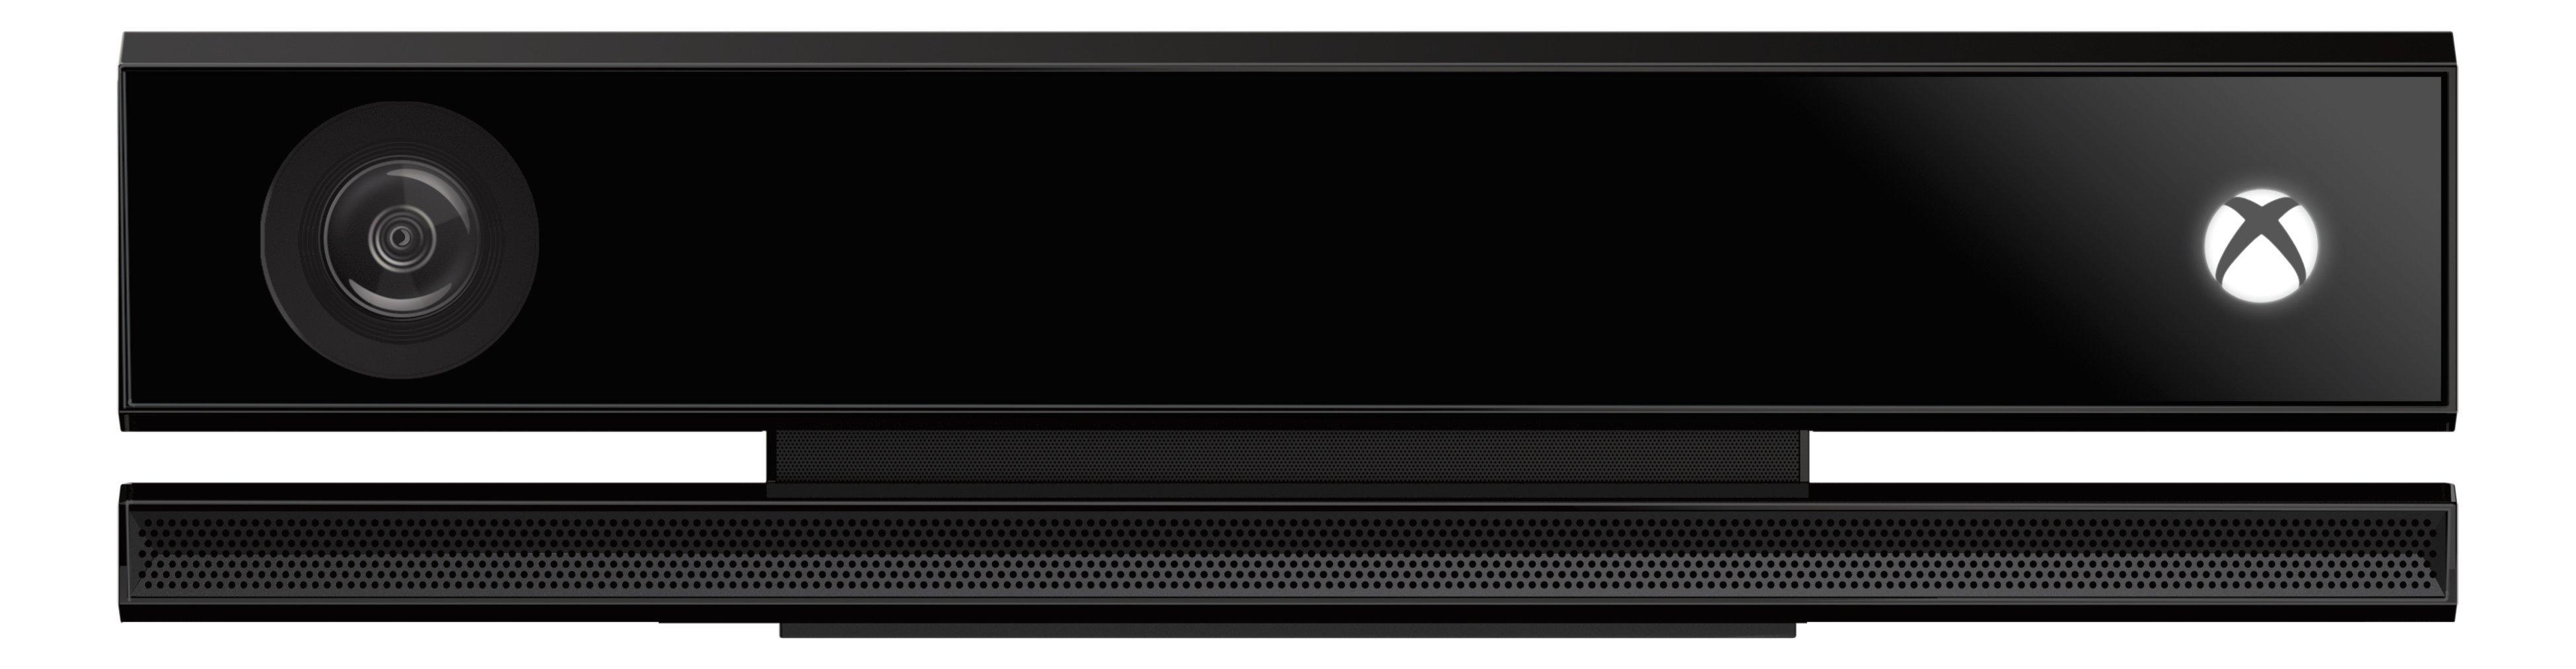 Microsoft Kinect for Xbox One | GameStop